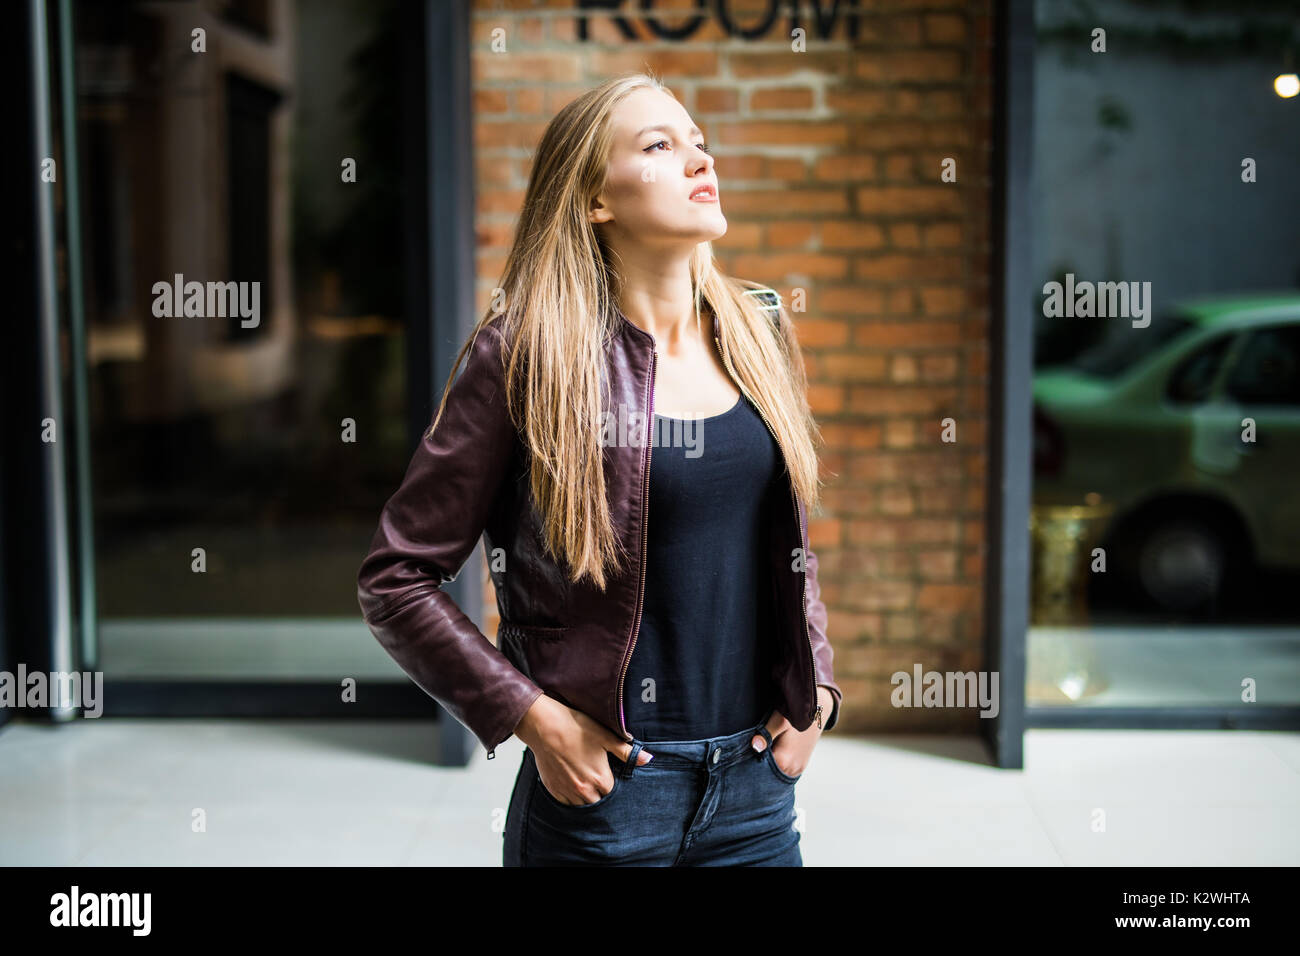 Summer sunny lifestyle fashion portrait of young stylish hipster woman walking on the street, wearing cute trendy outfit Stock Photo